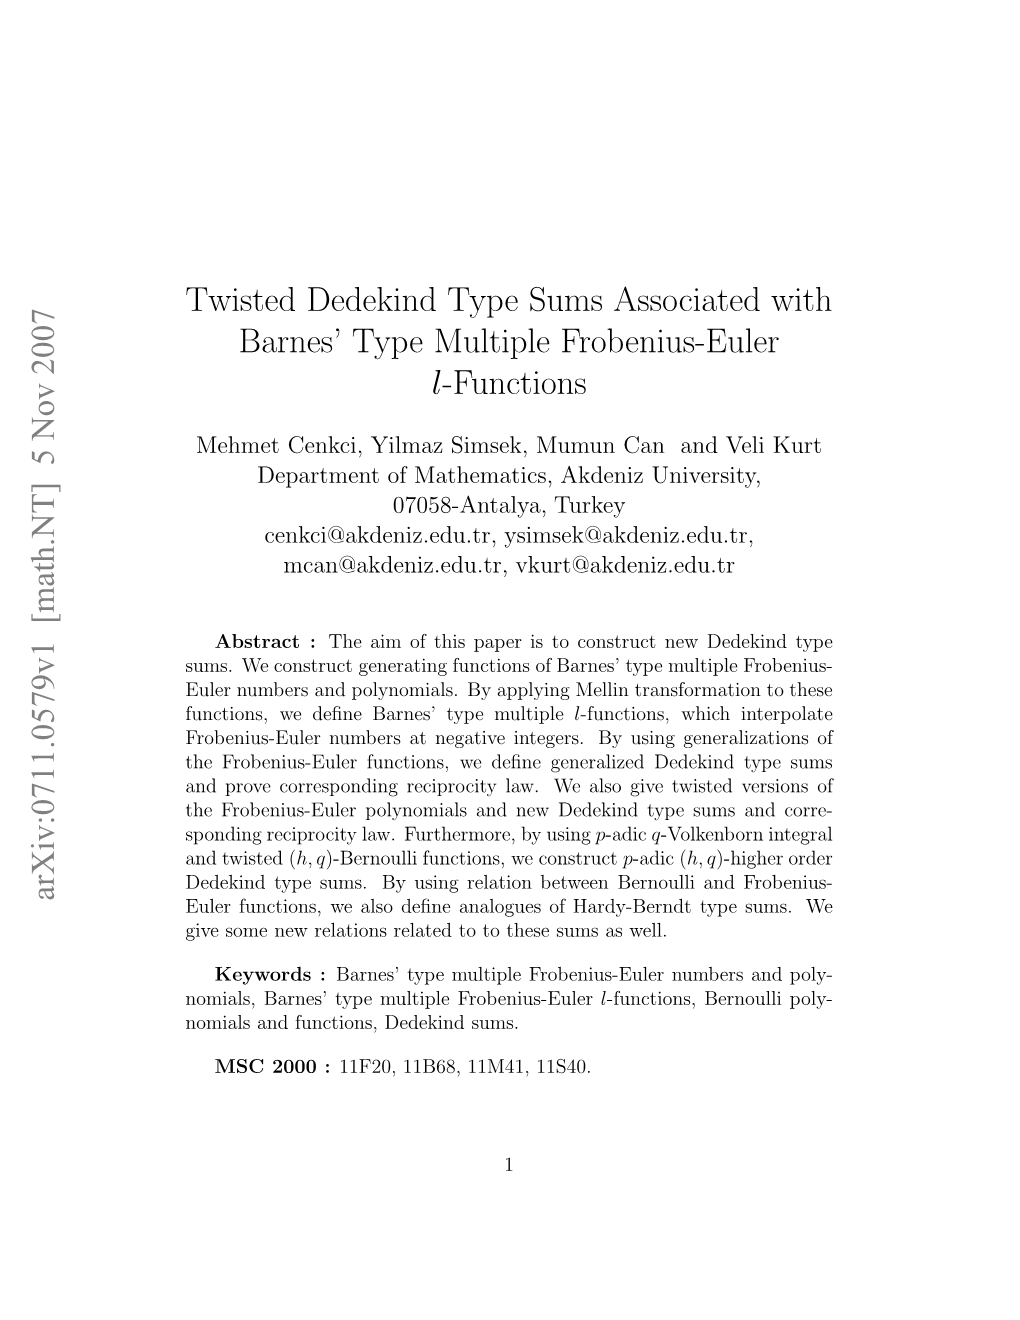 Twisted Dedekind Type Sums Associated with Barnes' Type Multiple Frobenius-Euler L-Functions